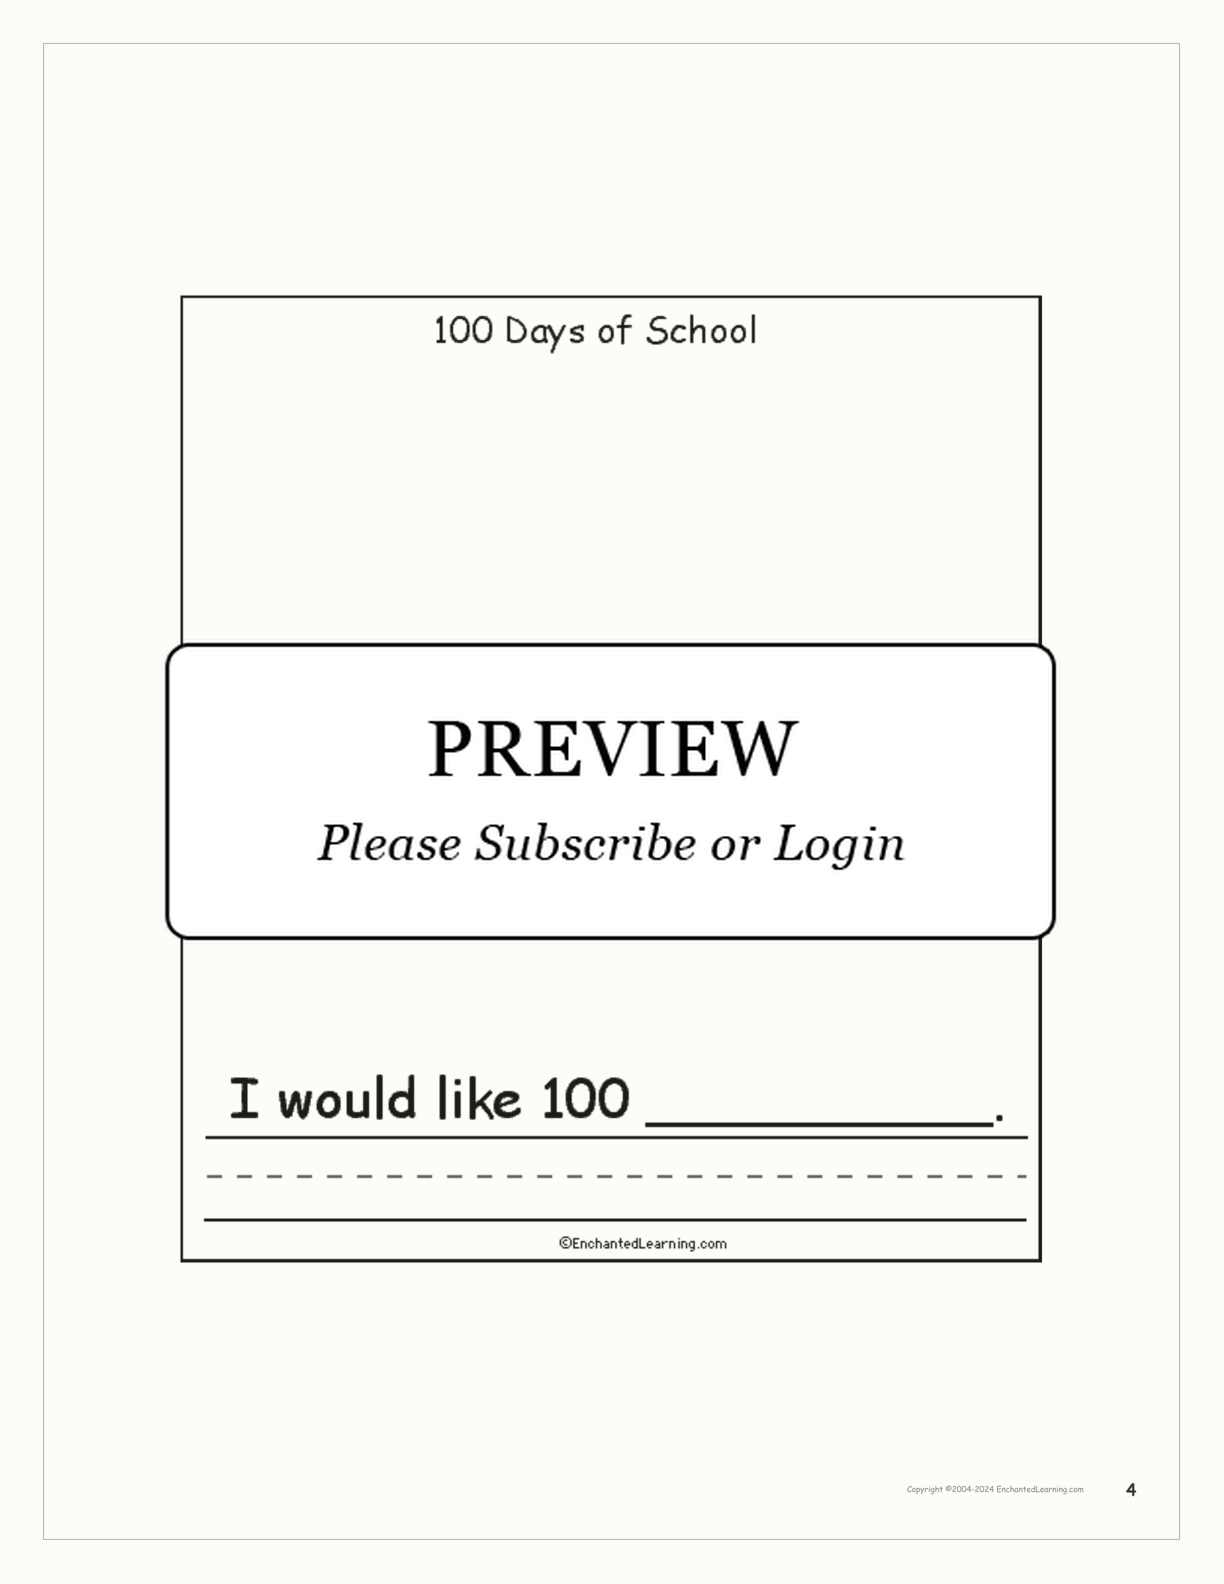 100 Days of School interactive worksheet page 4